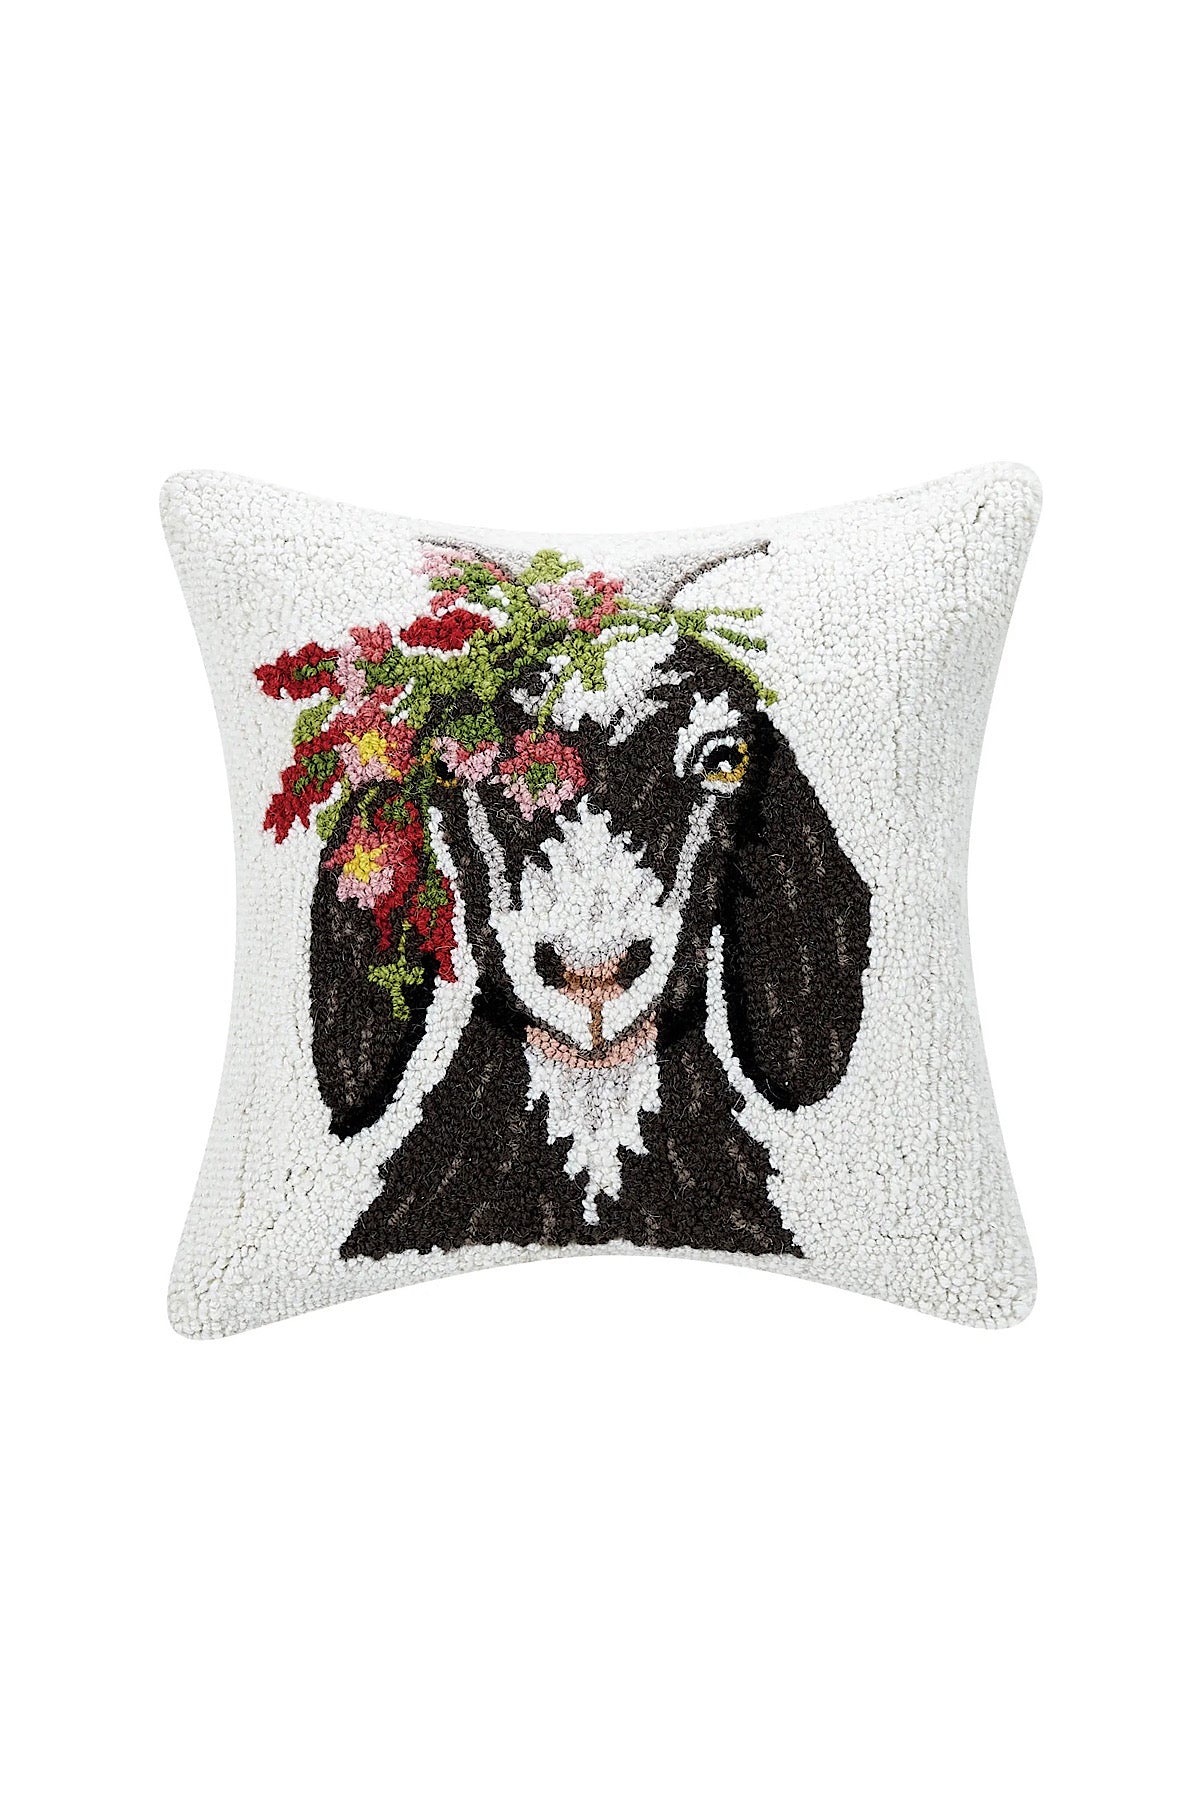 Floral Goat Hooked Pillow